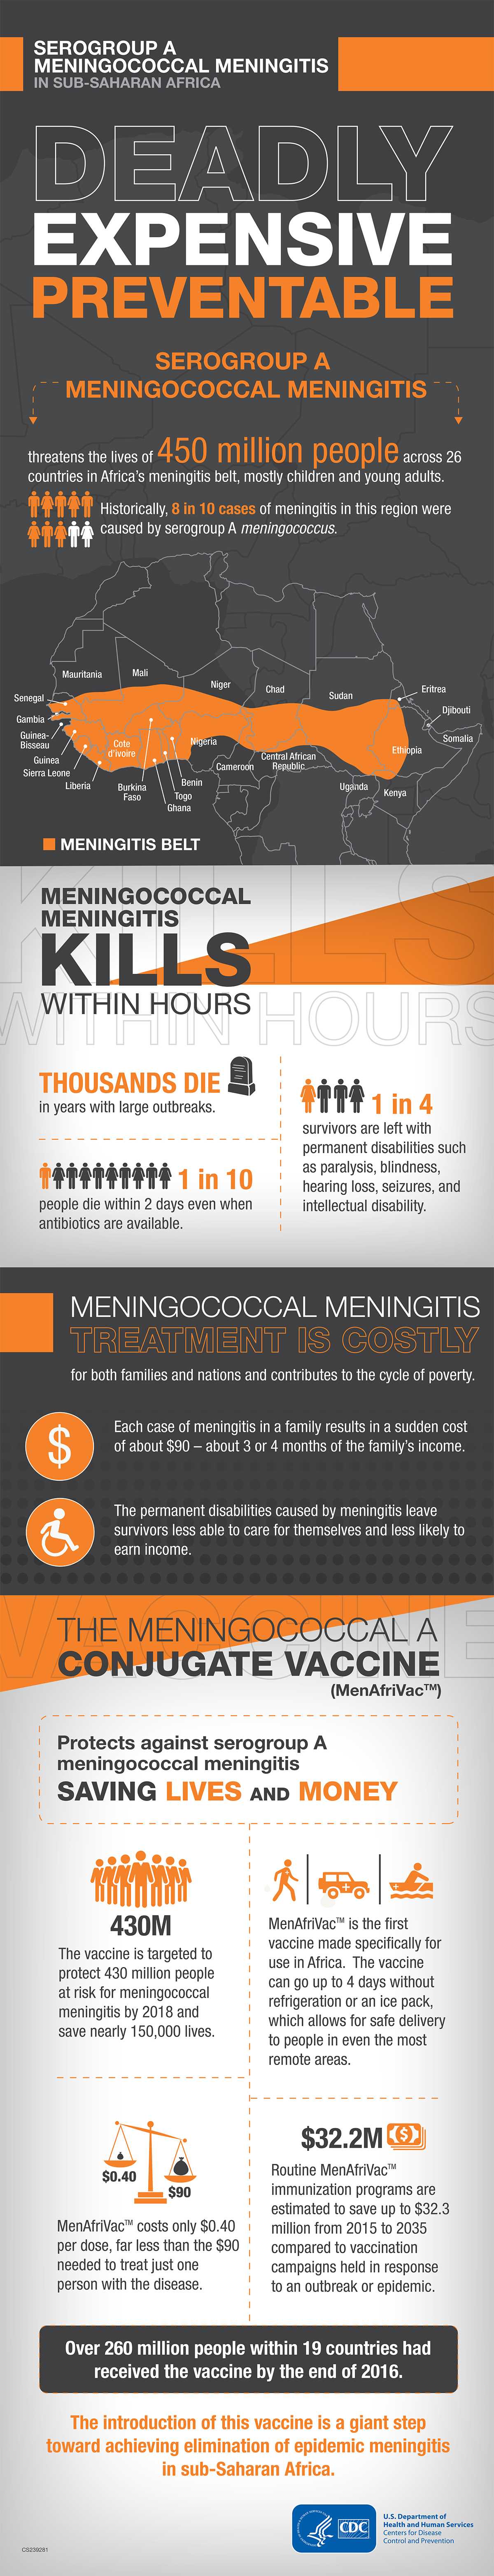 Infographic: Meningitis A is deadly, expensive, and preventable. It threatens the lives of 450 million people across 26 countries in Africa’s Meningitis Belt, mostly children and young adults. Meningitis kills within hours. Thousands die in years with large outbreaks.